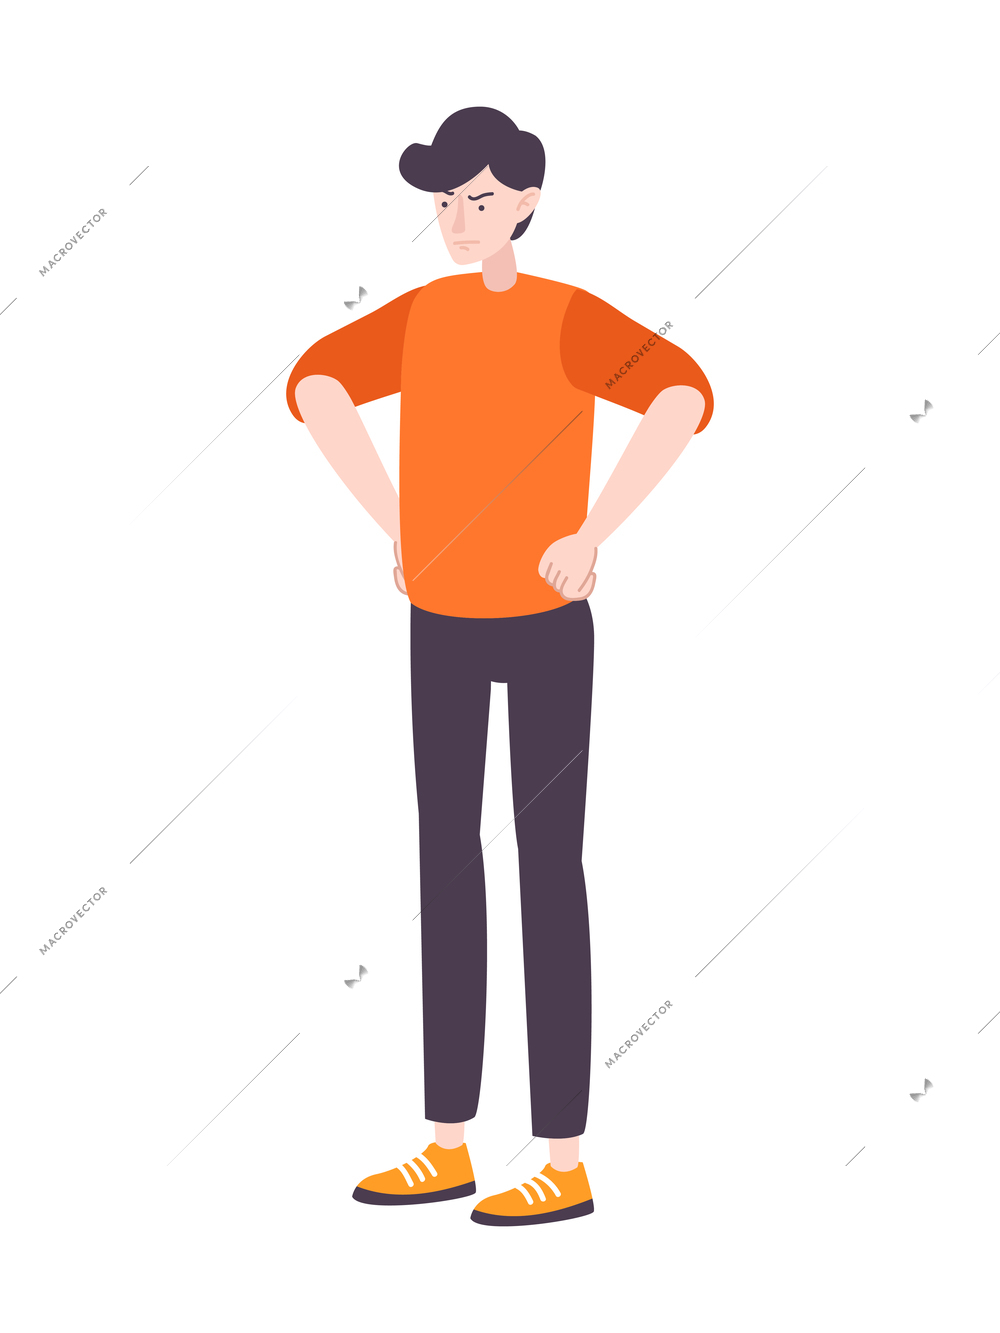 People emotion flat composition with isolated doodle style human character expressing emotions vector illustration